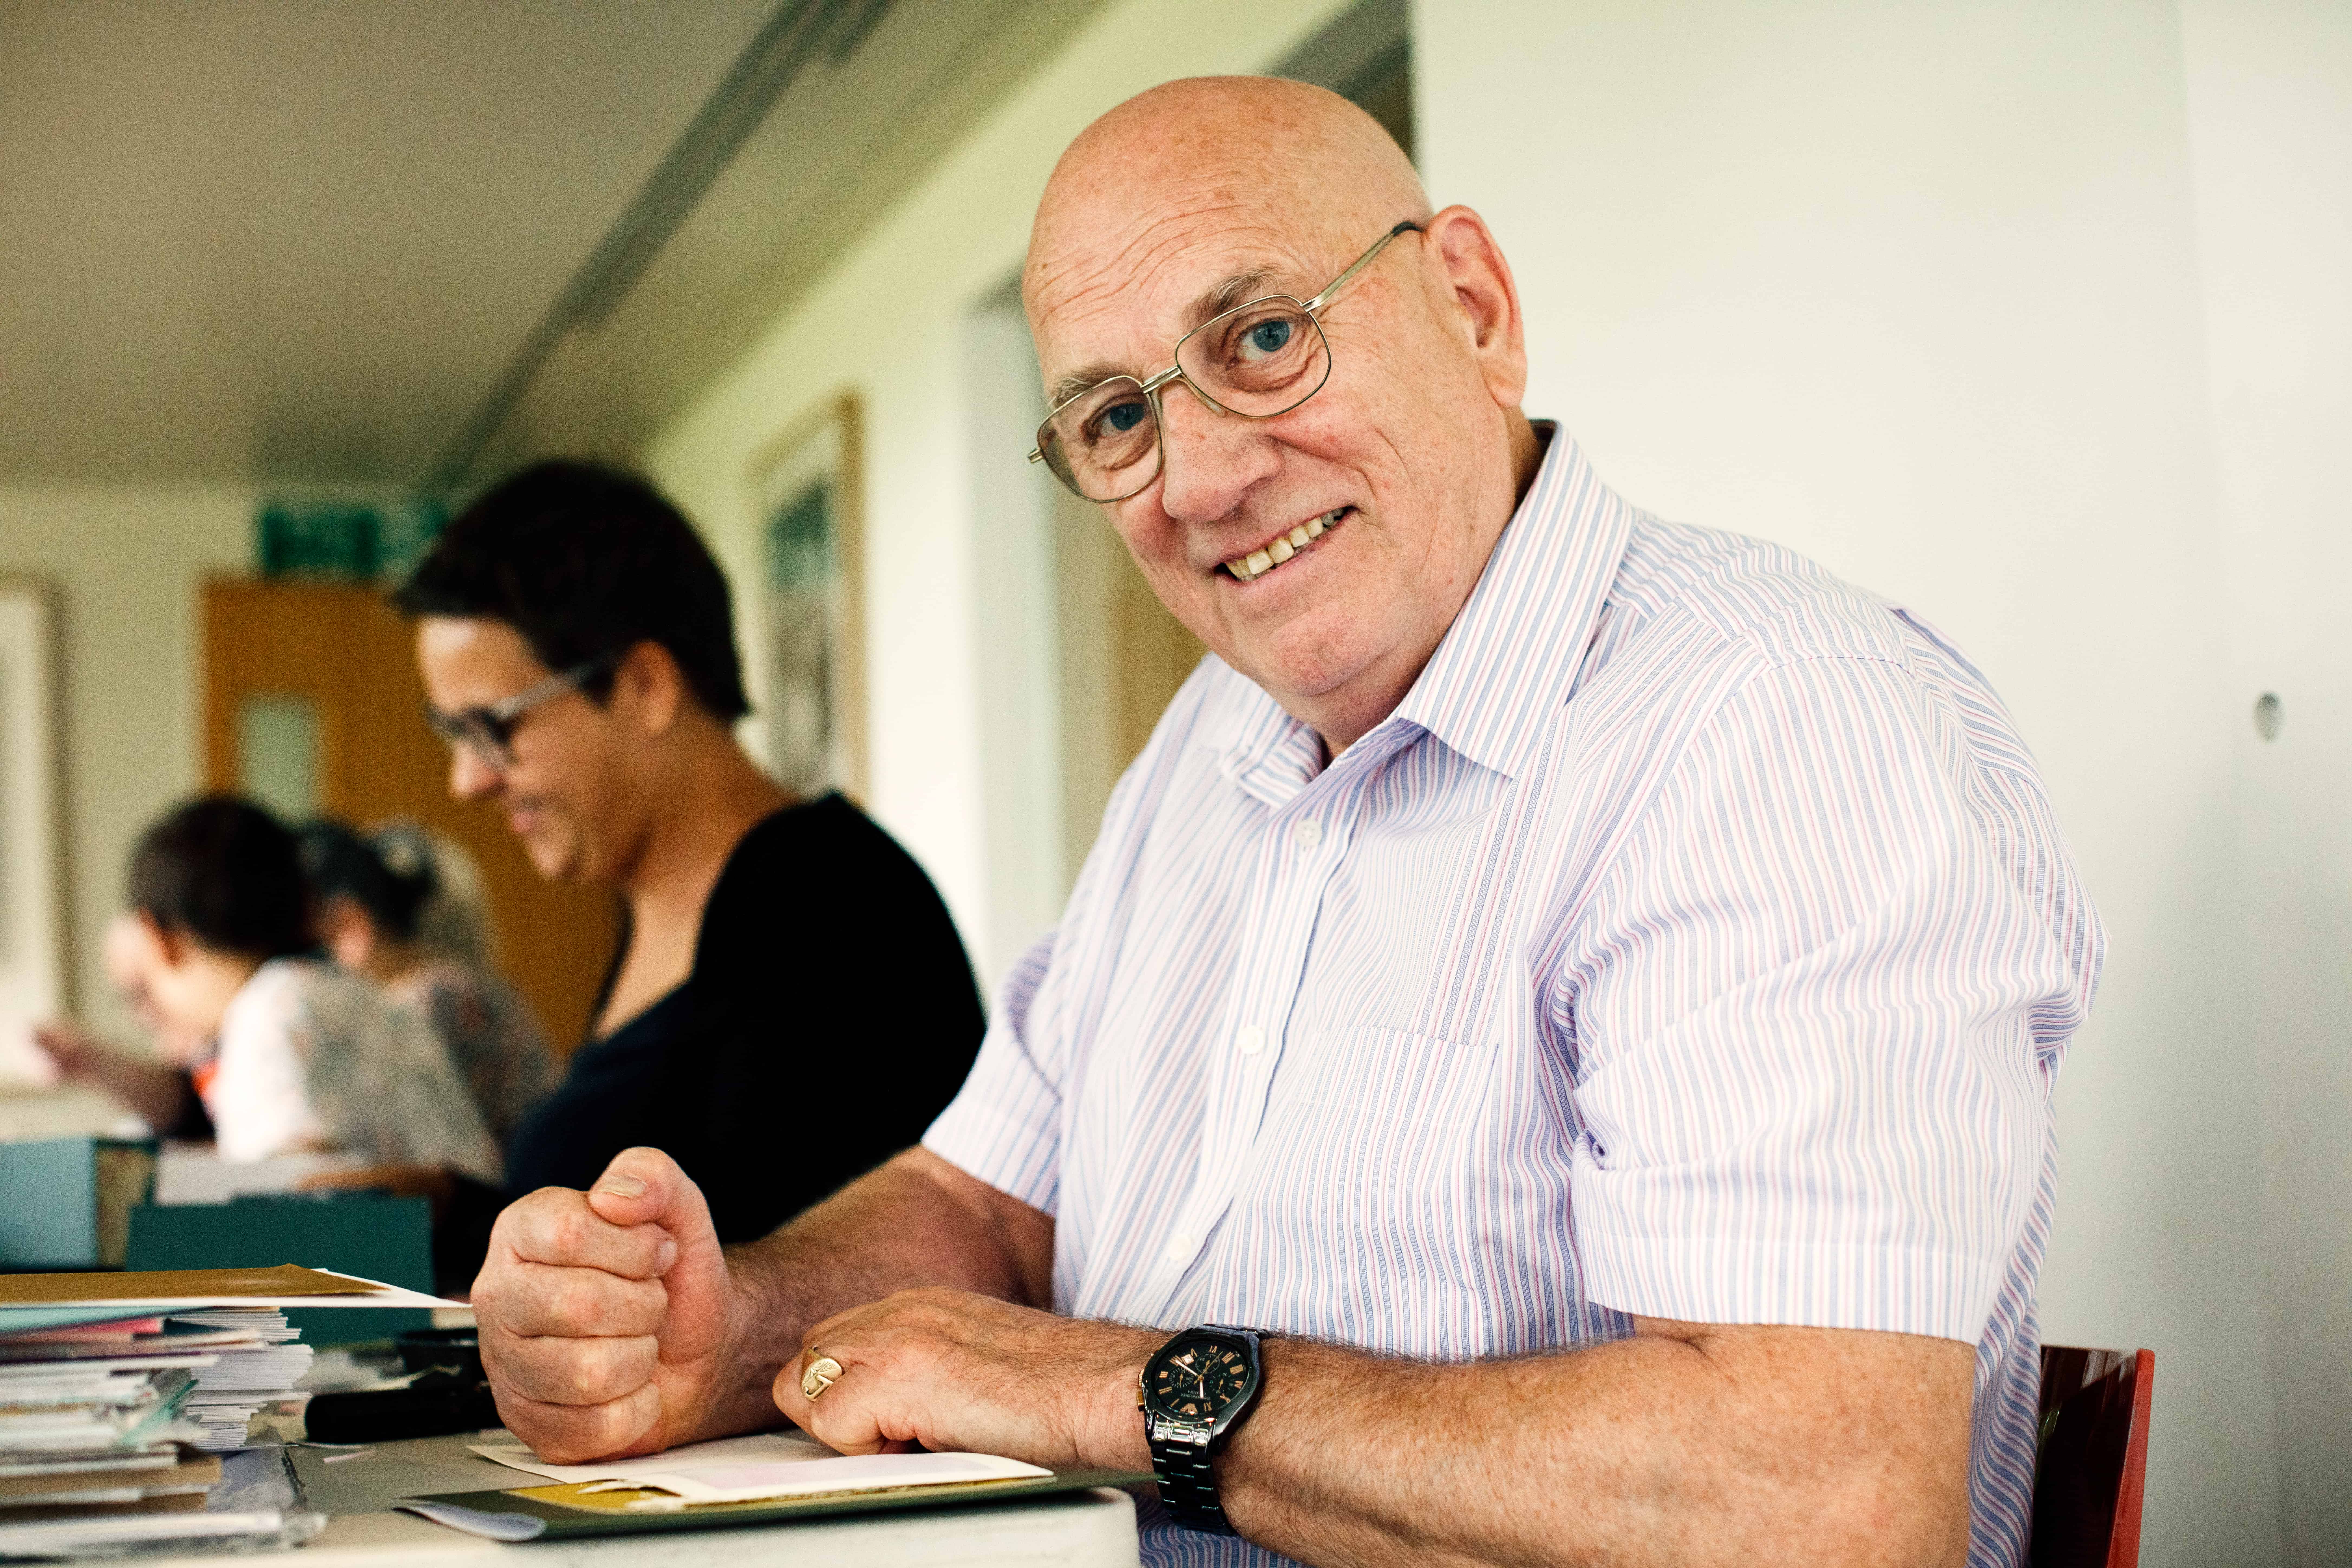 Photo of a man looking at the camera and smiling. The man is white, has no hair and is wearing glasses. He is sat a table with a pen in his hand. There are papers on the table and he is sat next to four other people.